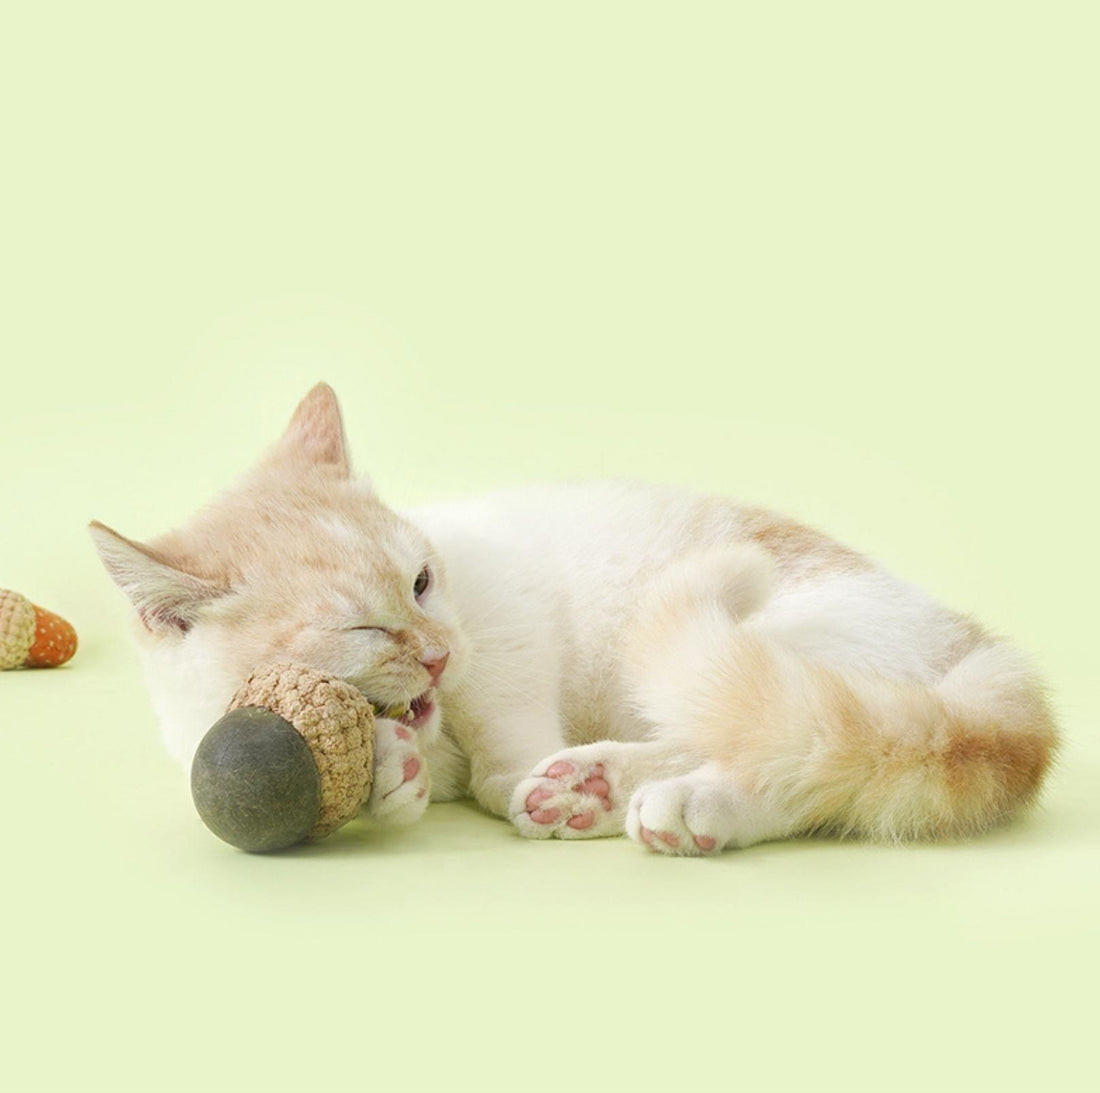 Feline-Frendly Herbaceous-Based Cat Toy-Know The Differences Before Make Your Cat Go Crazy - PawPawUp